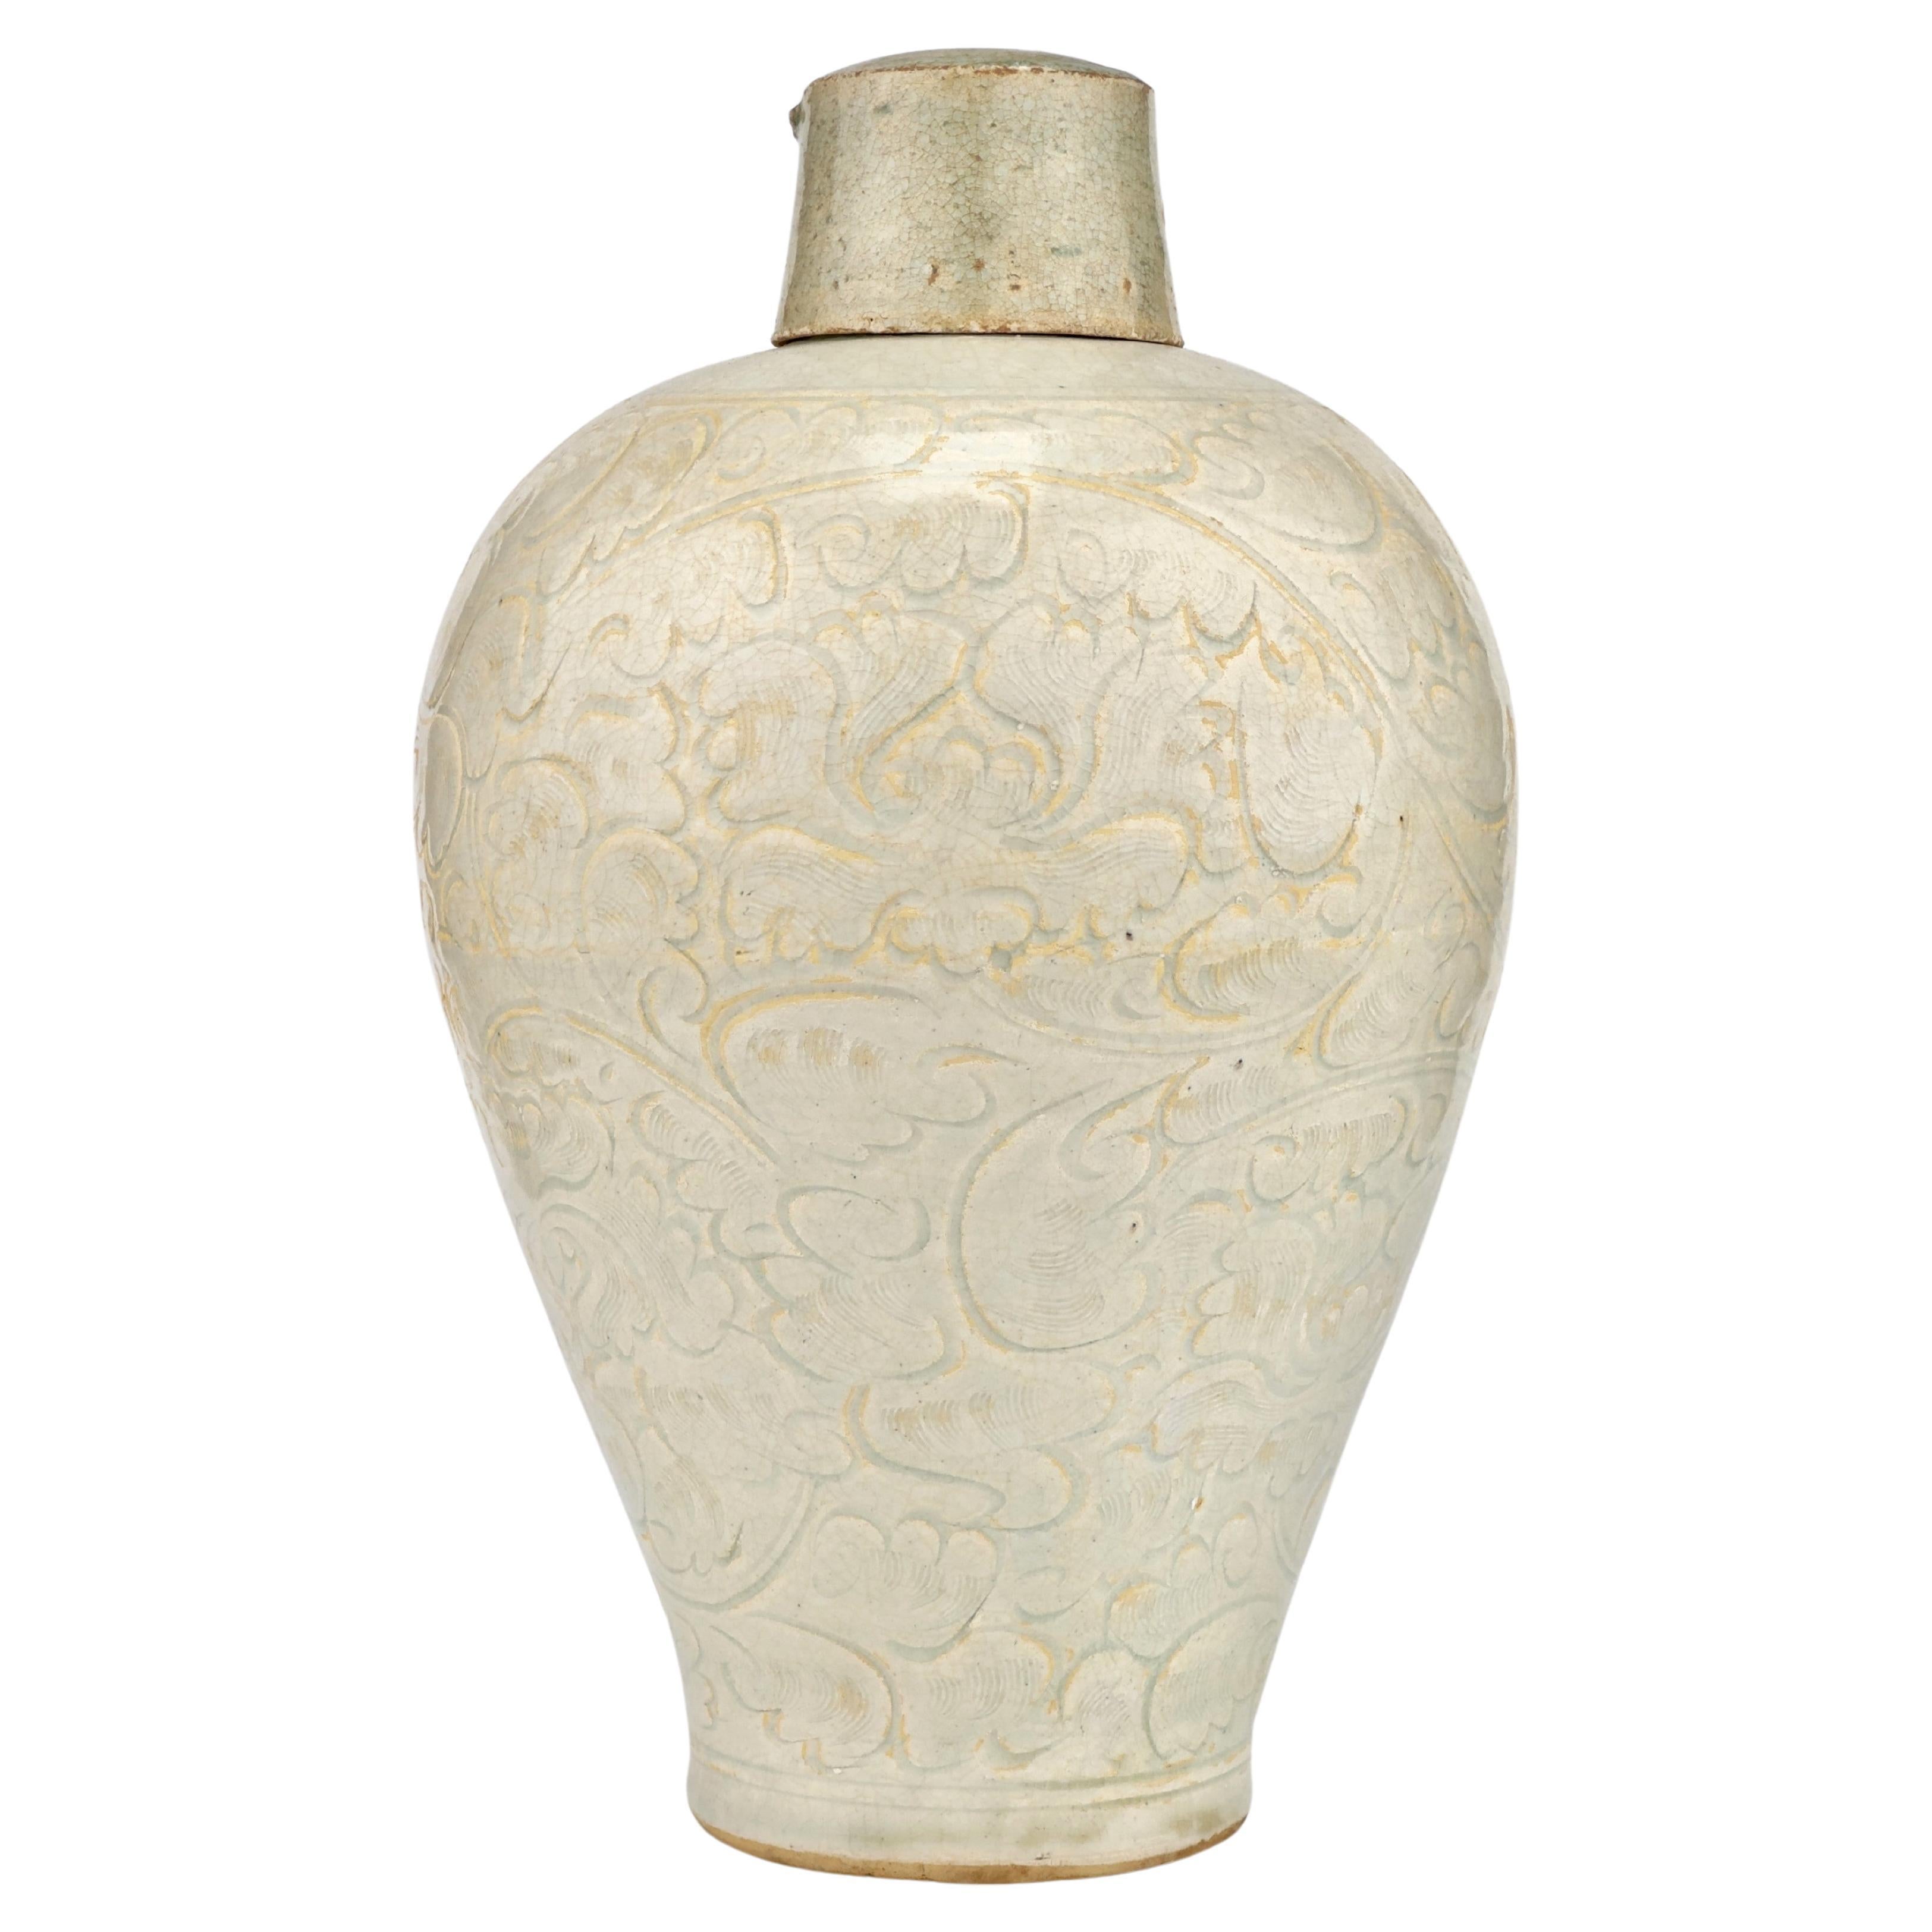 A Qingbai Carved Meiping Porcelain, Song Dynasty